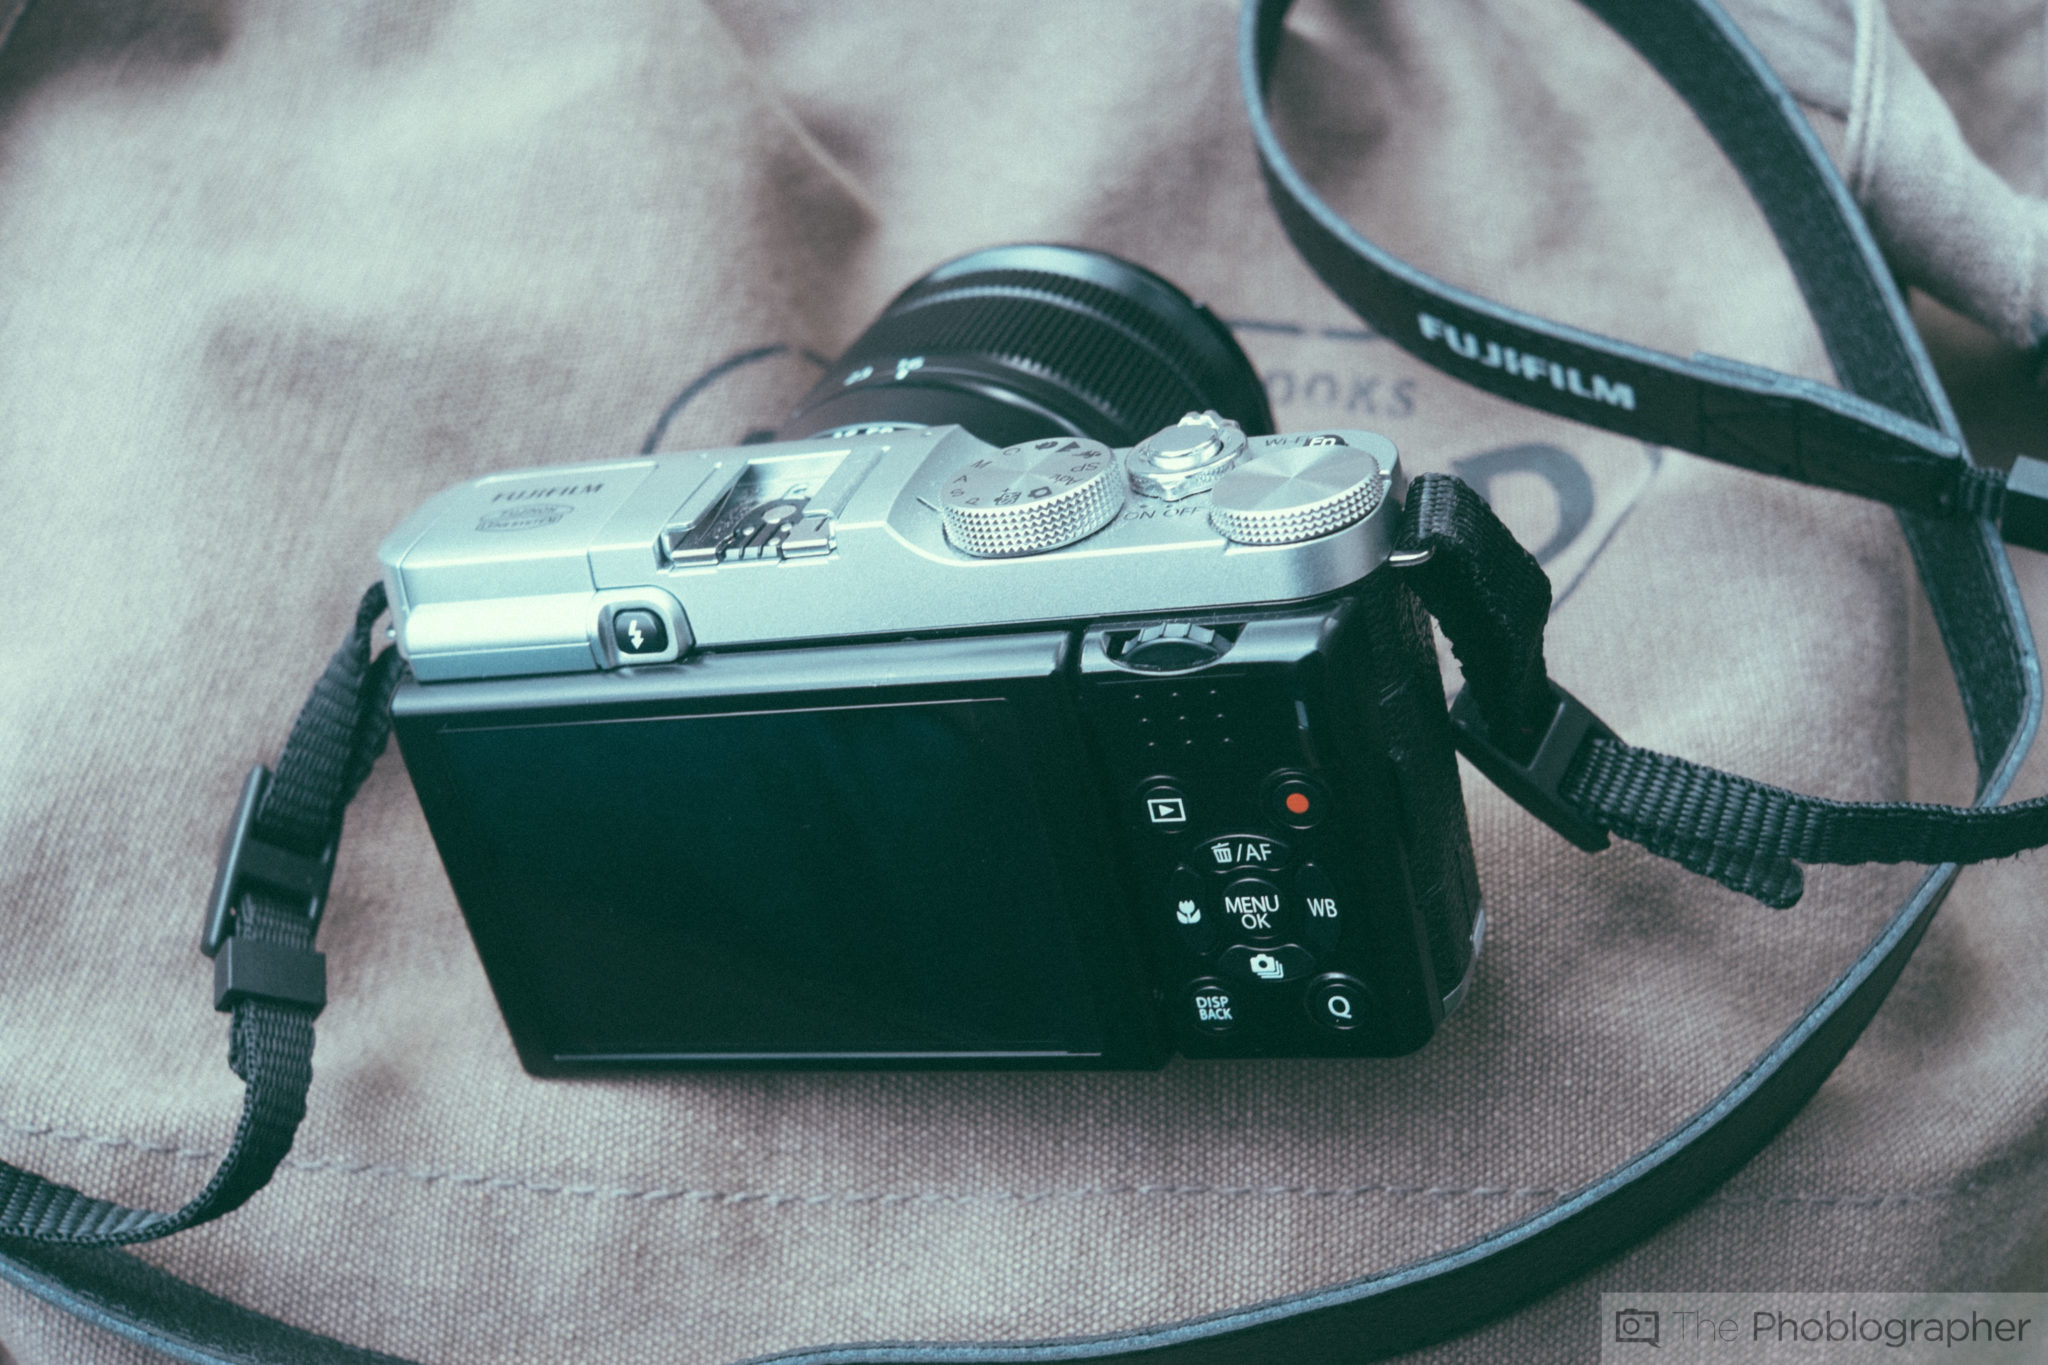 Fujifilm X-M1 review: Great photos for the money - CNET